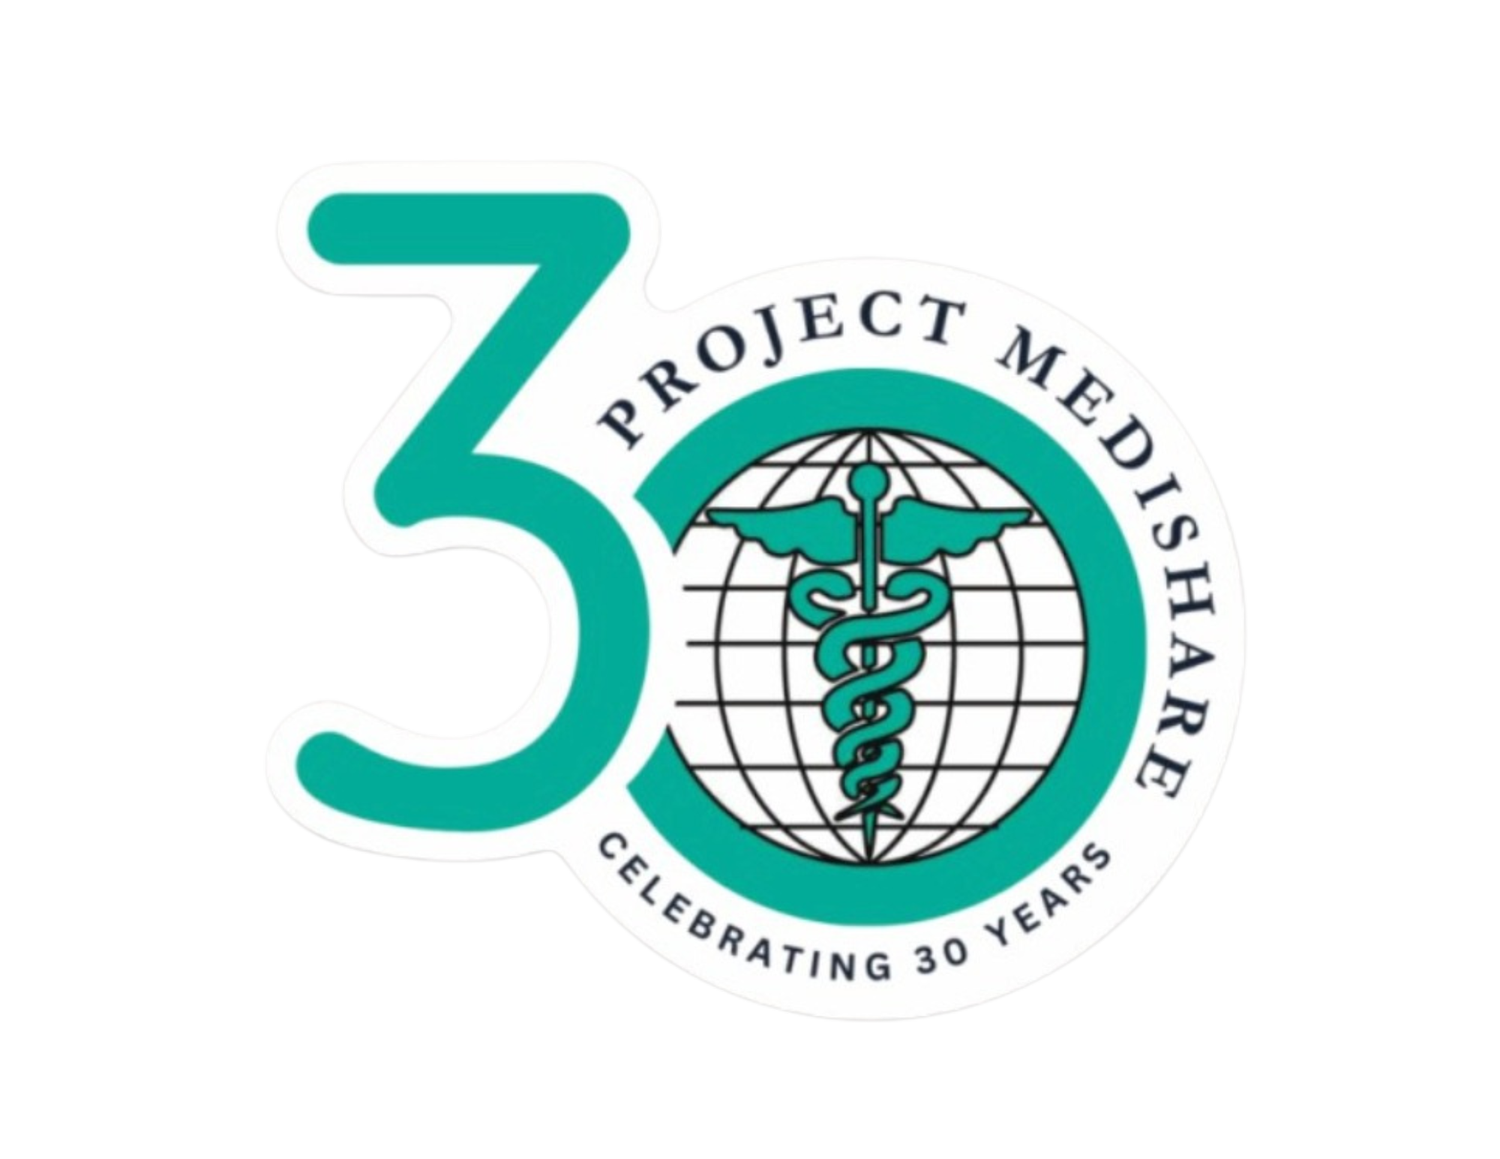 Project Medishare - Celebrating 30 Years of Healthcare in Haiti